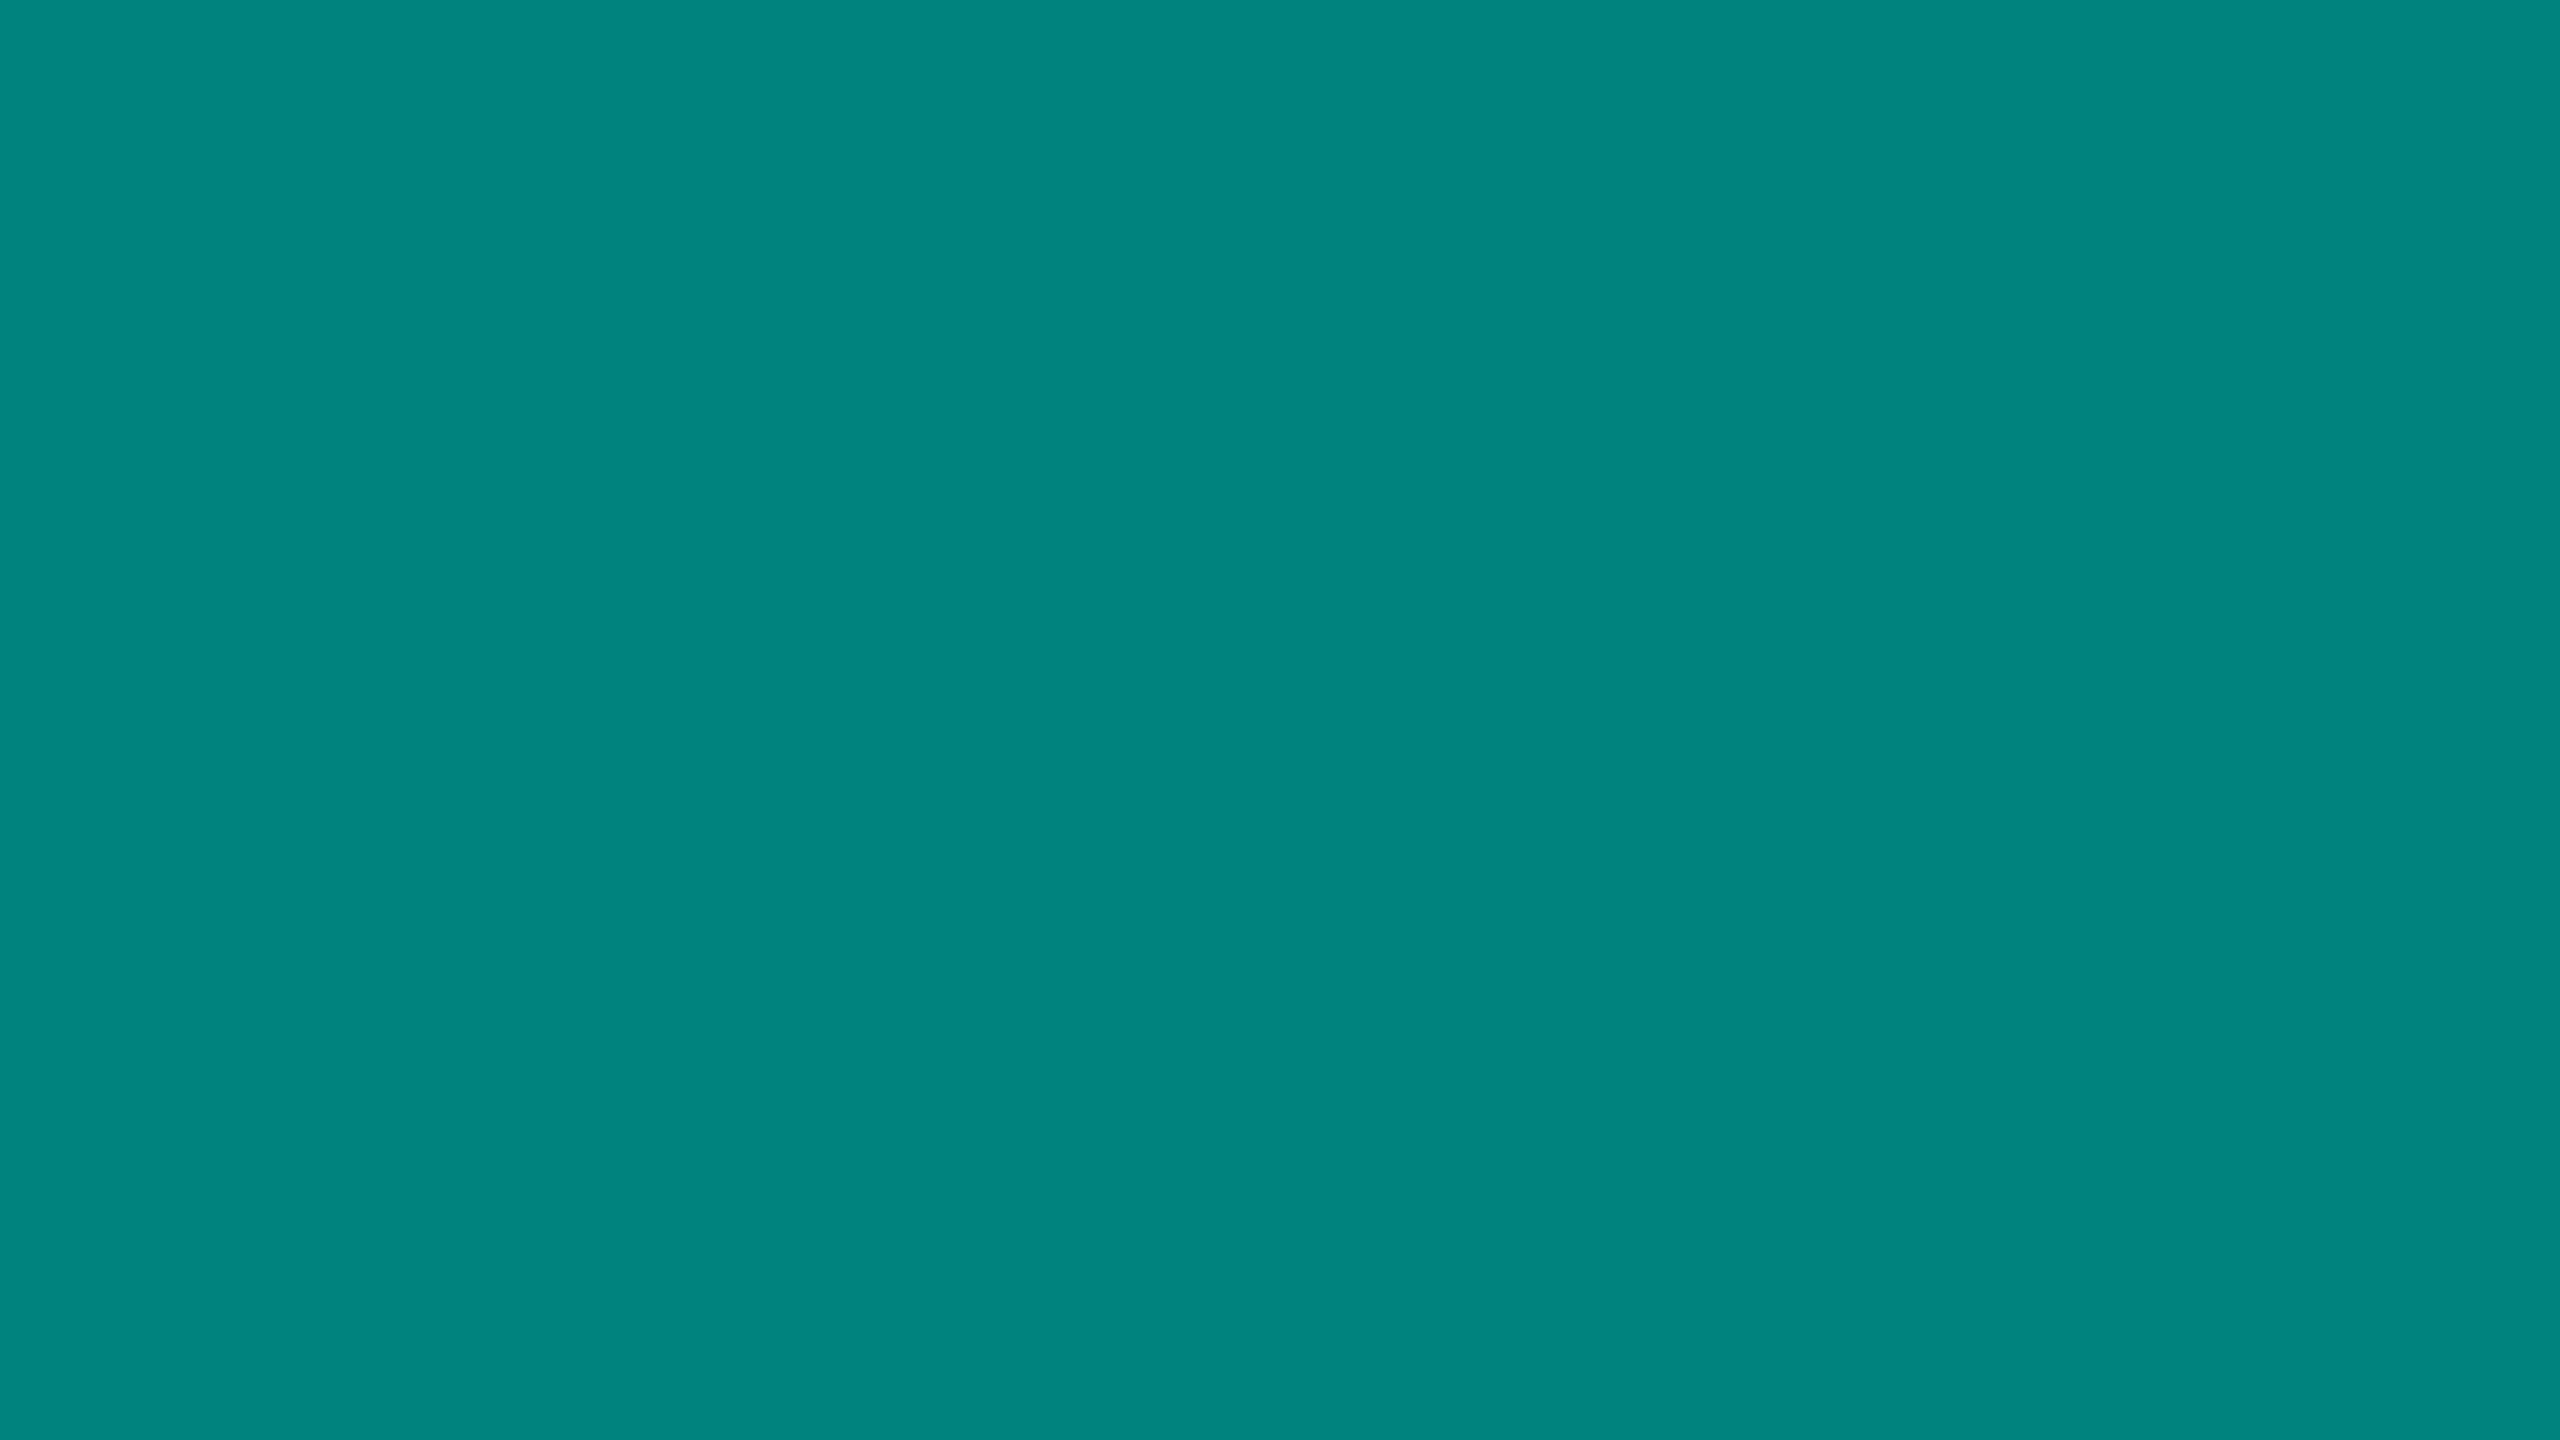 Resolution Teal Green Solid Color Background And